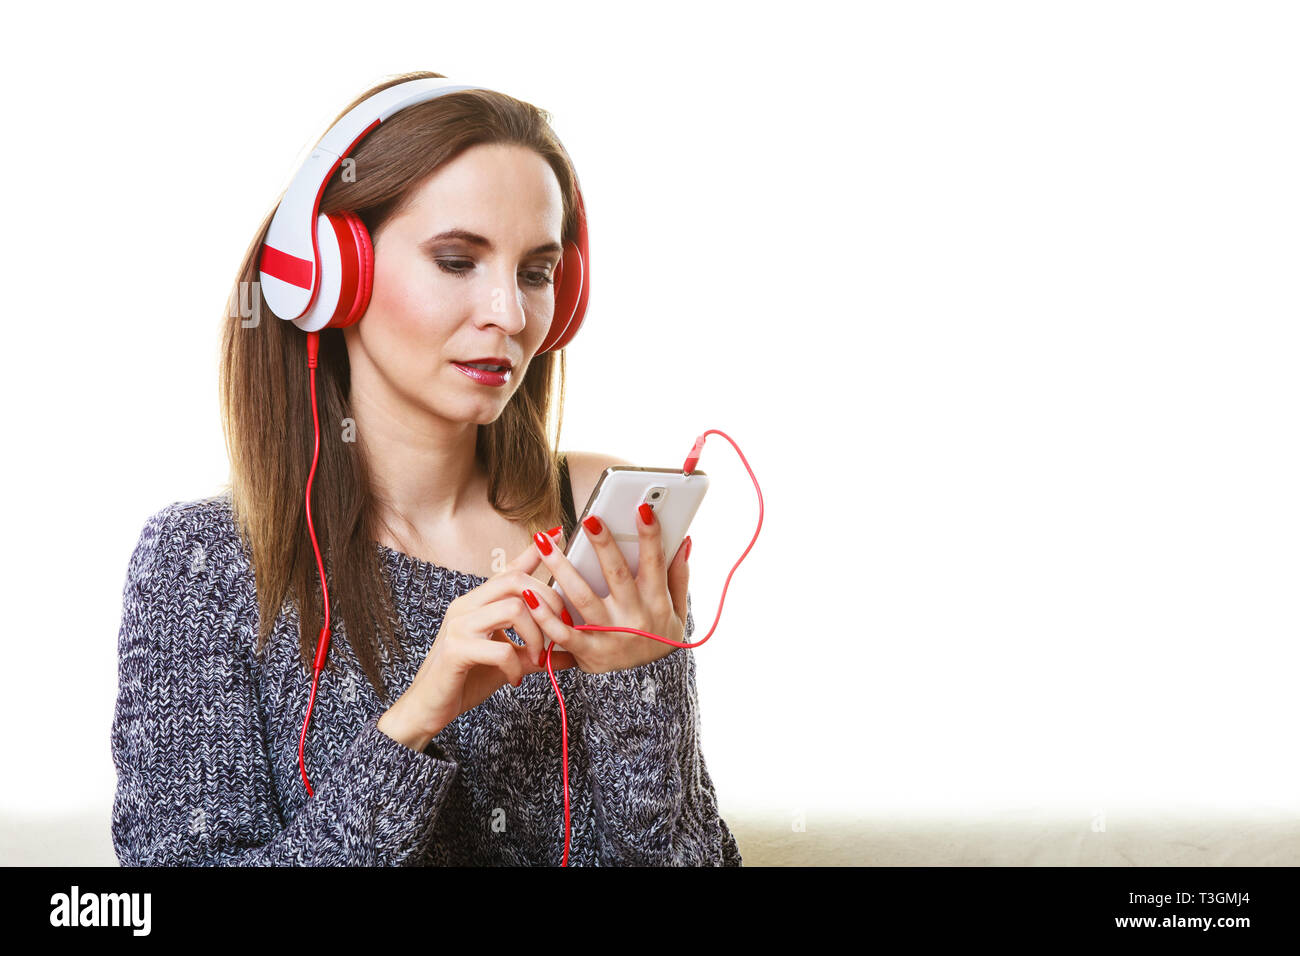 People leisure relax concept. Woman casual style red big headphones  listening music mp3 relaxing Stock Photo - Alamy